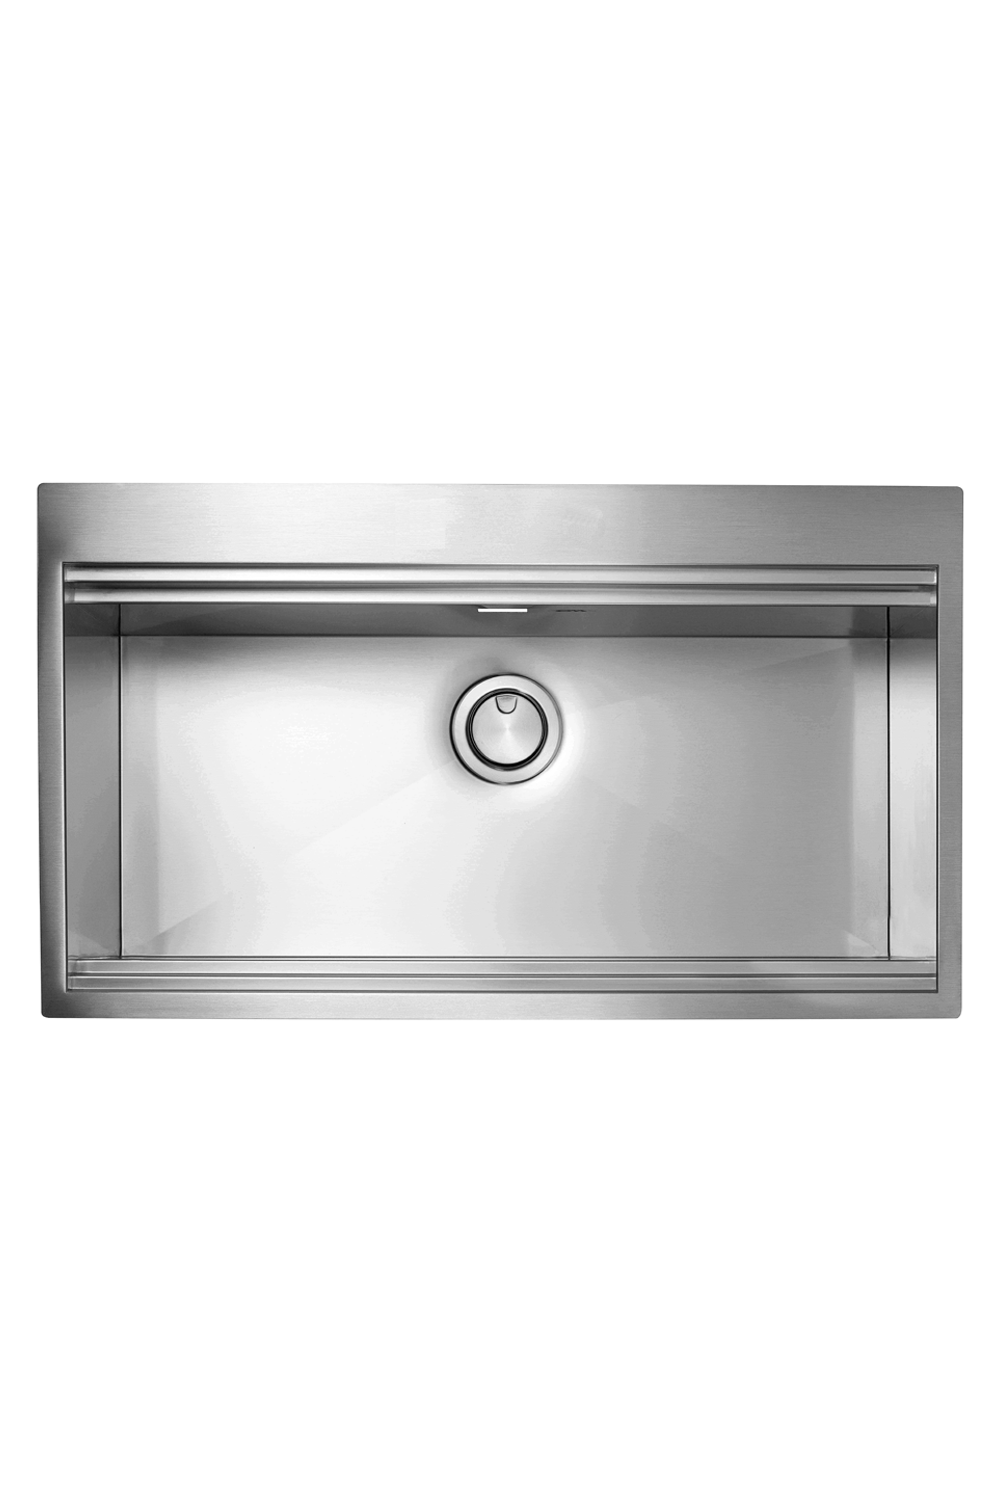 CM ITALIA 810mm R0-Corner Square Stainless Steel Sink (With Accessories!) | Made in Italy | 意大利製 R10小圓角810mm超大不銹鋼方星 方型星盆 單盆 水糟 多款配件可選